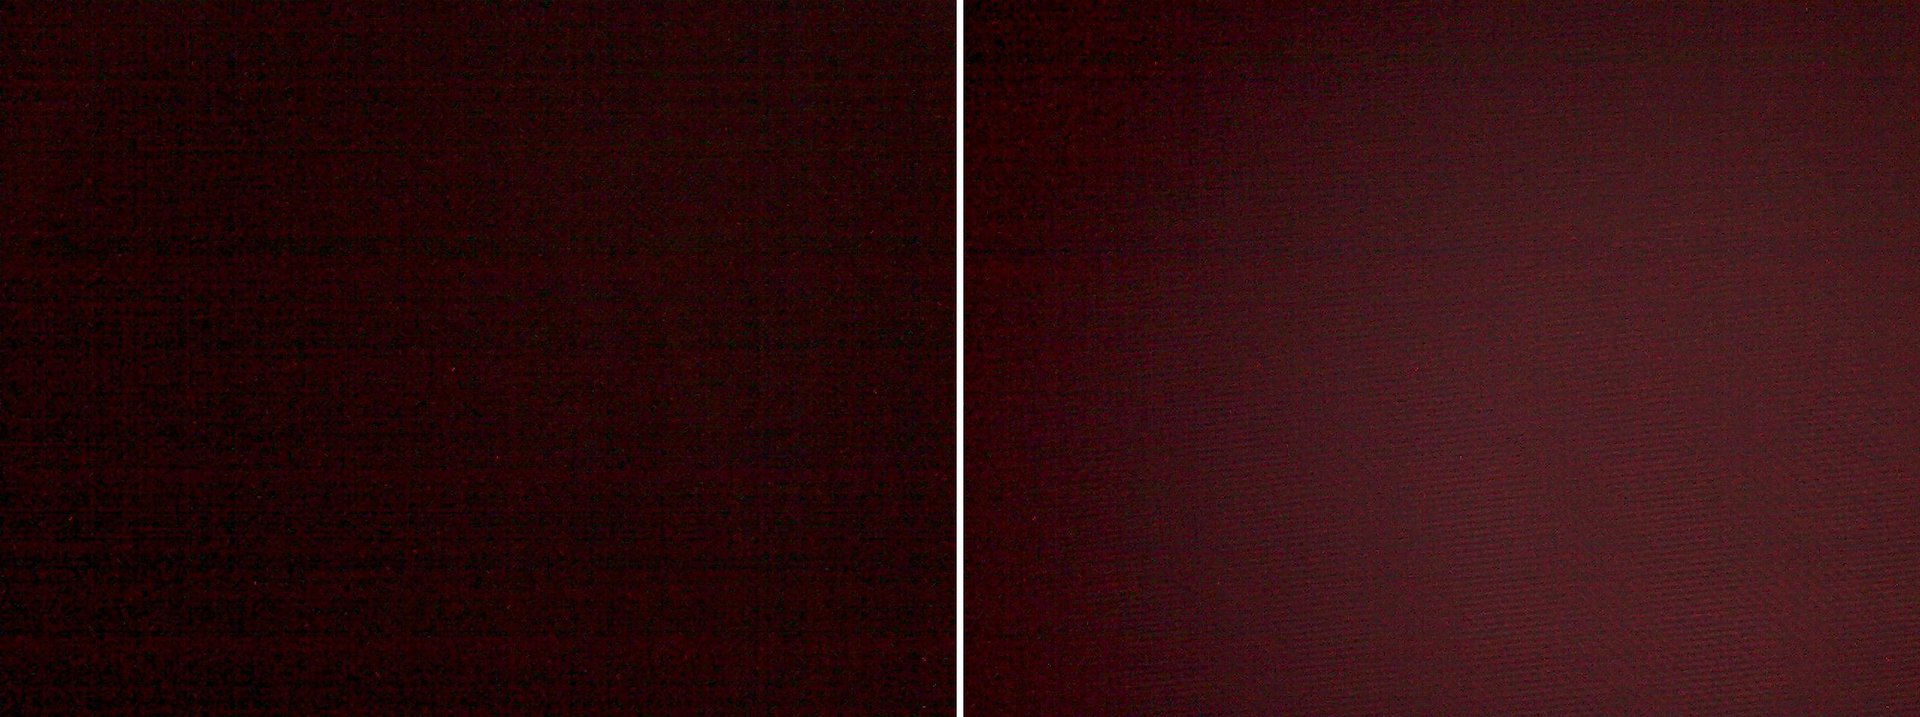 Magnified screen showing plain black (left -- Galaxy S4; right - HTC One)